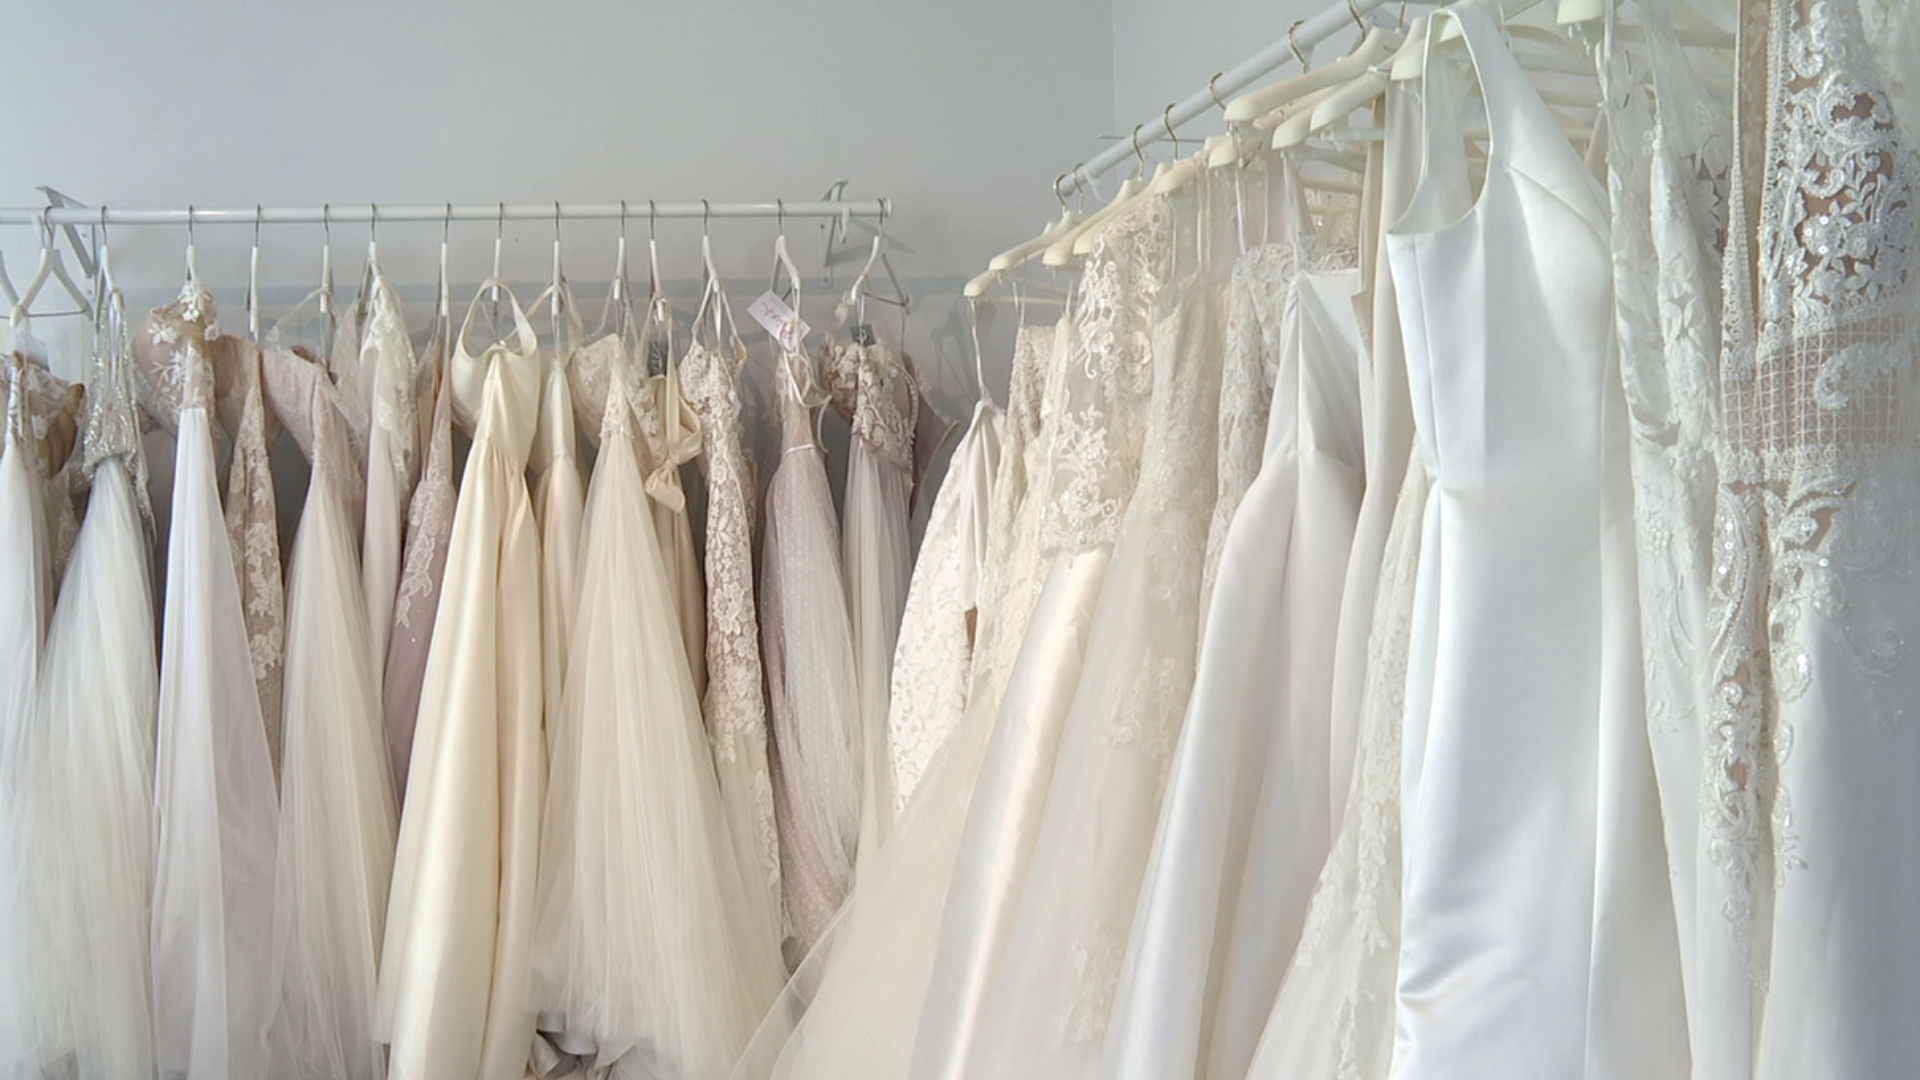 If you are a health care worker who's currently engaged and in need of a wedding dress, a bridal boutique in Scranton wants to give you a designer gown for free.